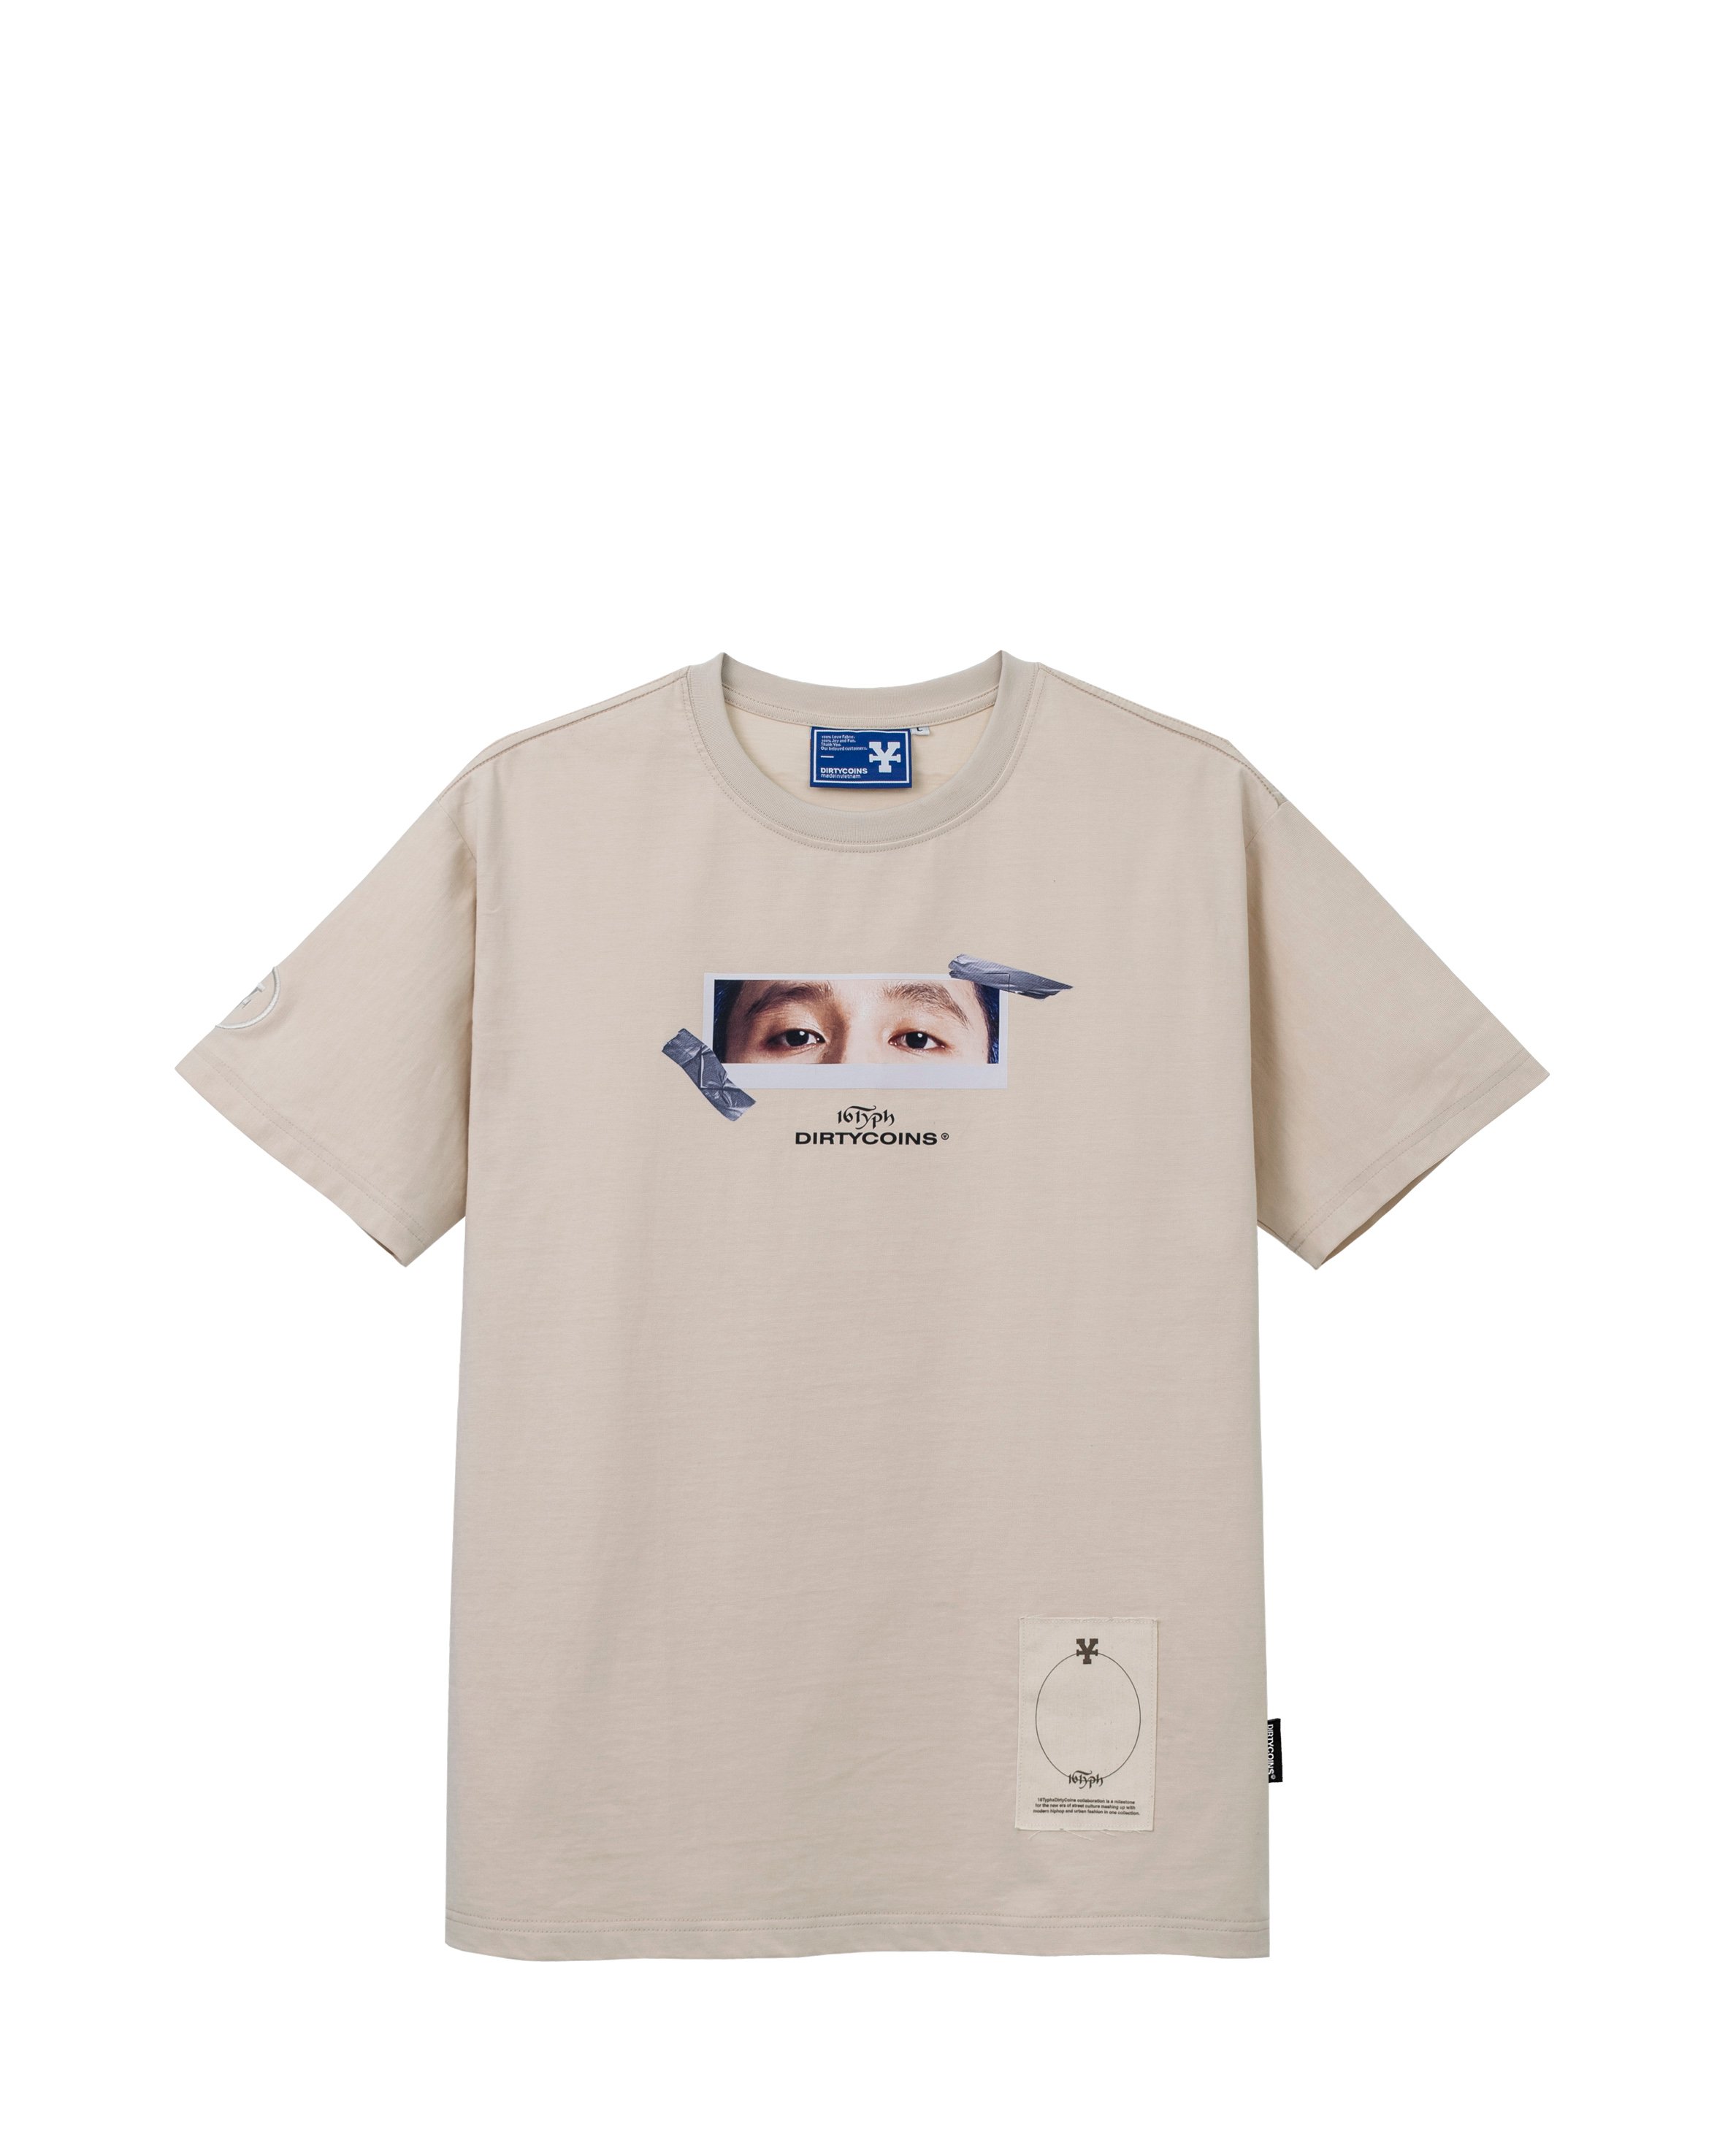 DirtyCoins x 16Typh The Eyes T-Shirt (Special edition)